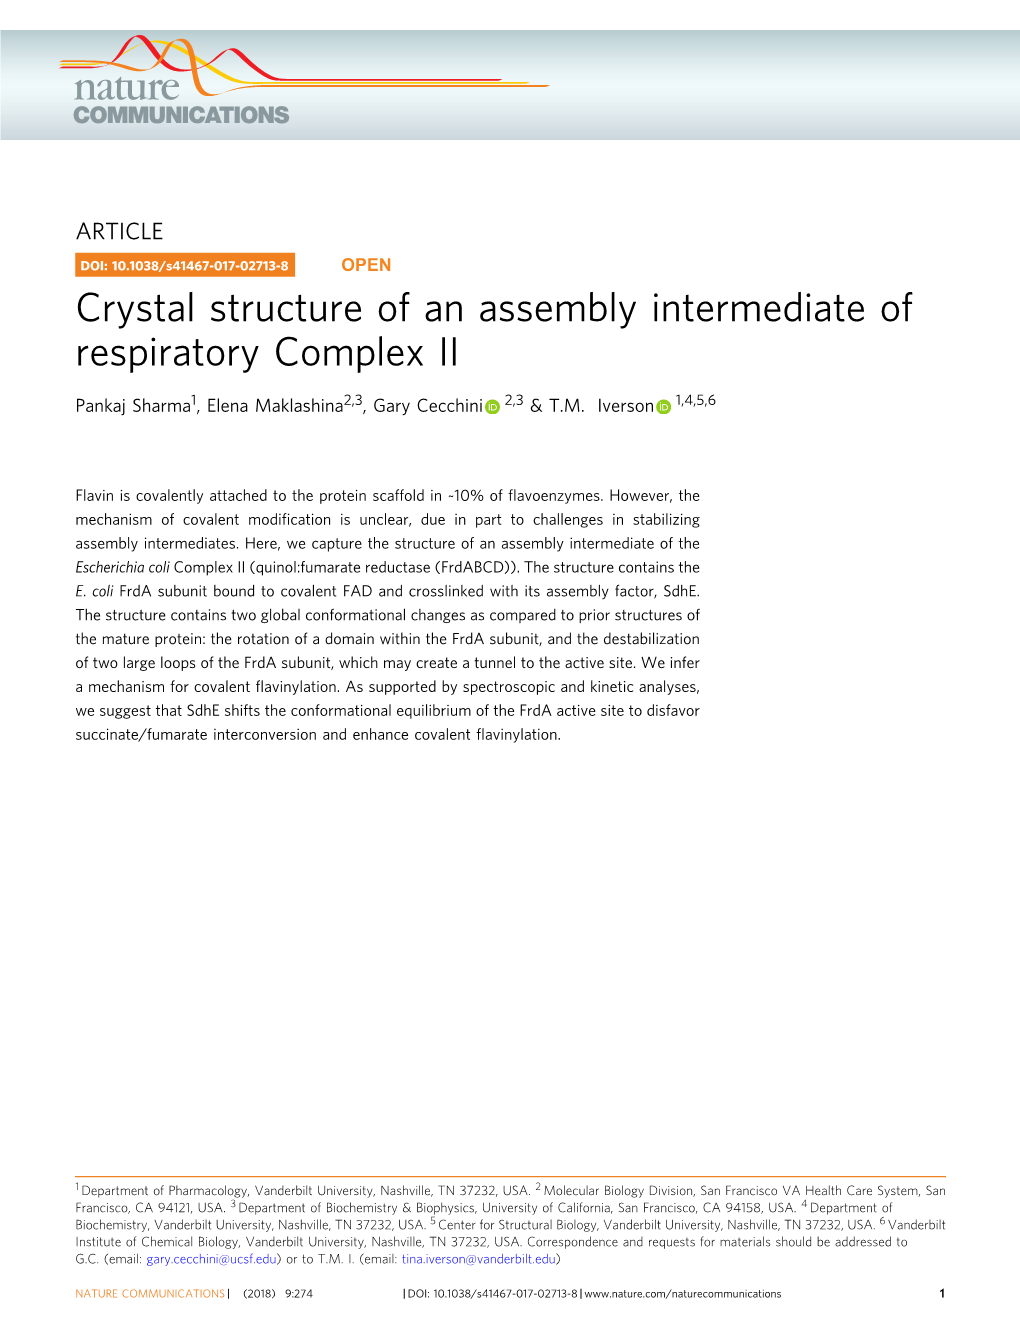 Crystal Structure of an Assembly Intermediate of Respiratory Complex II